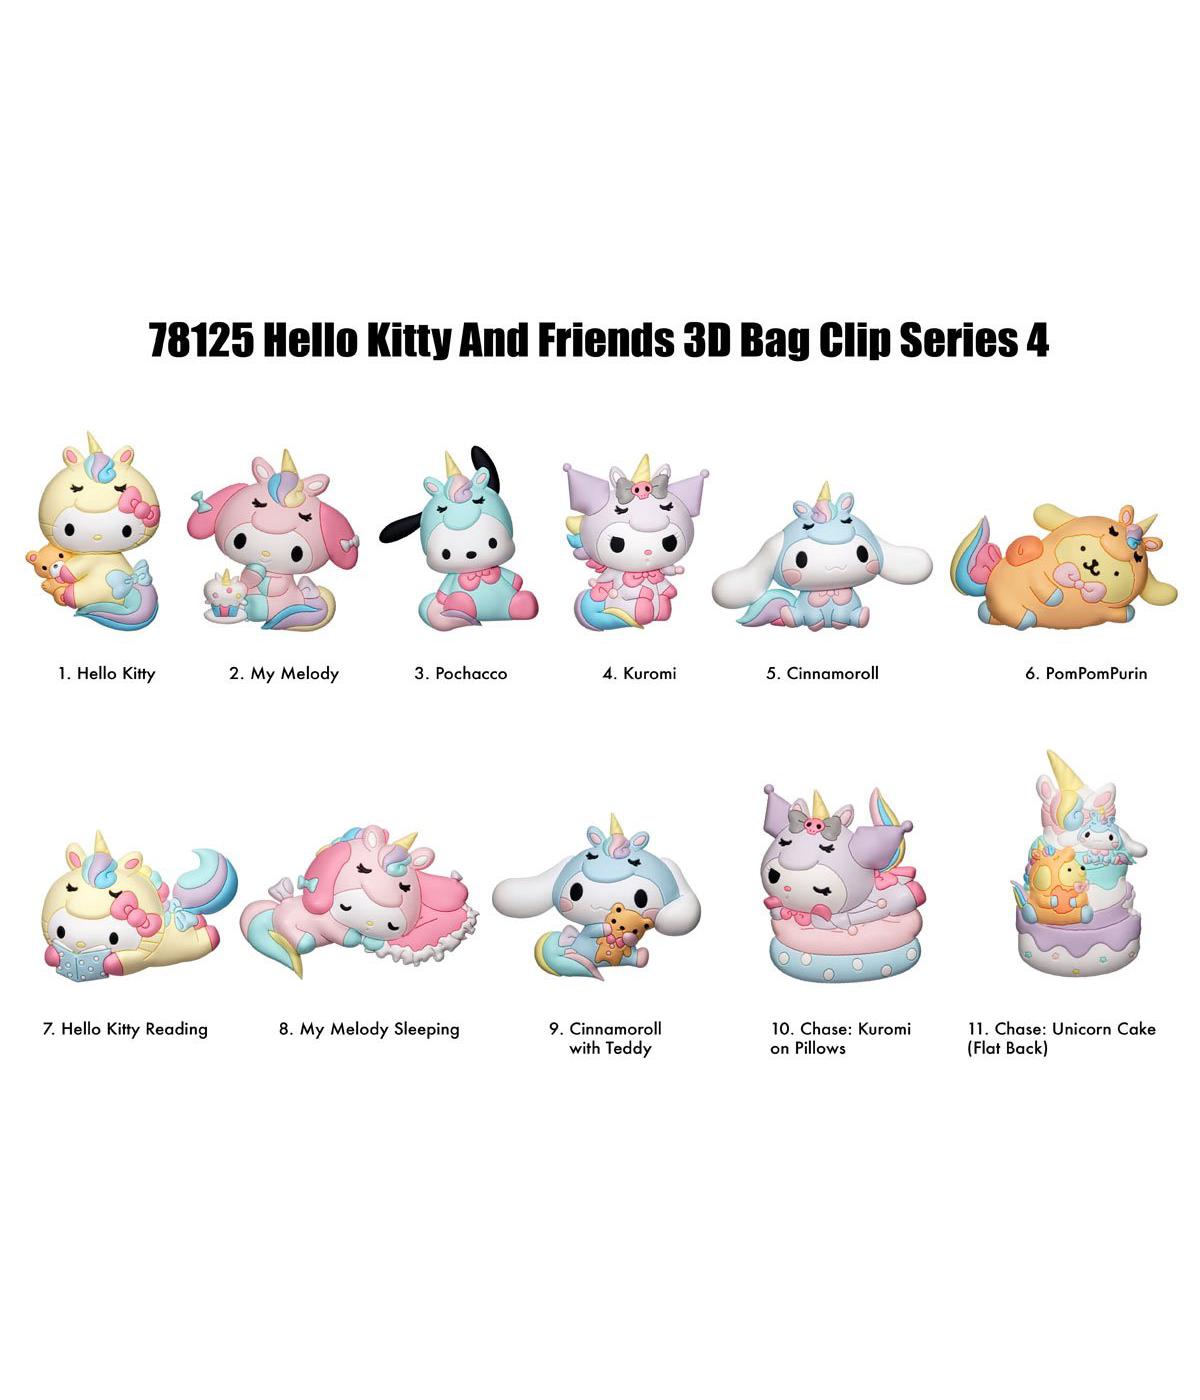 Monogram International Hello Kitty And Friends Figural Bag Clip - Series 4; image 2 of 3